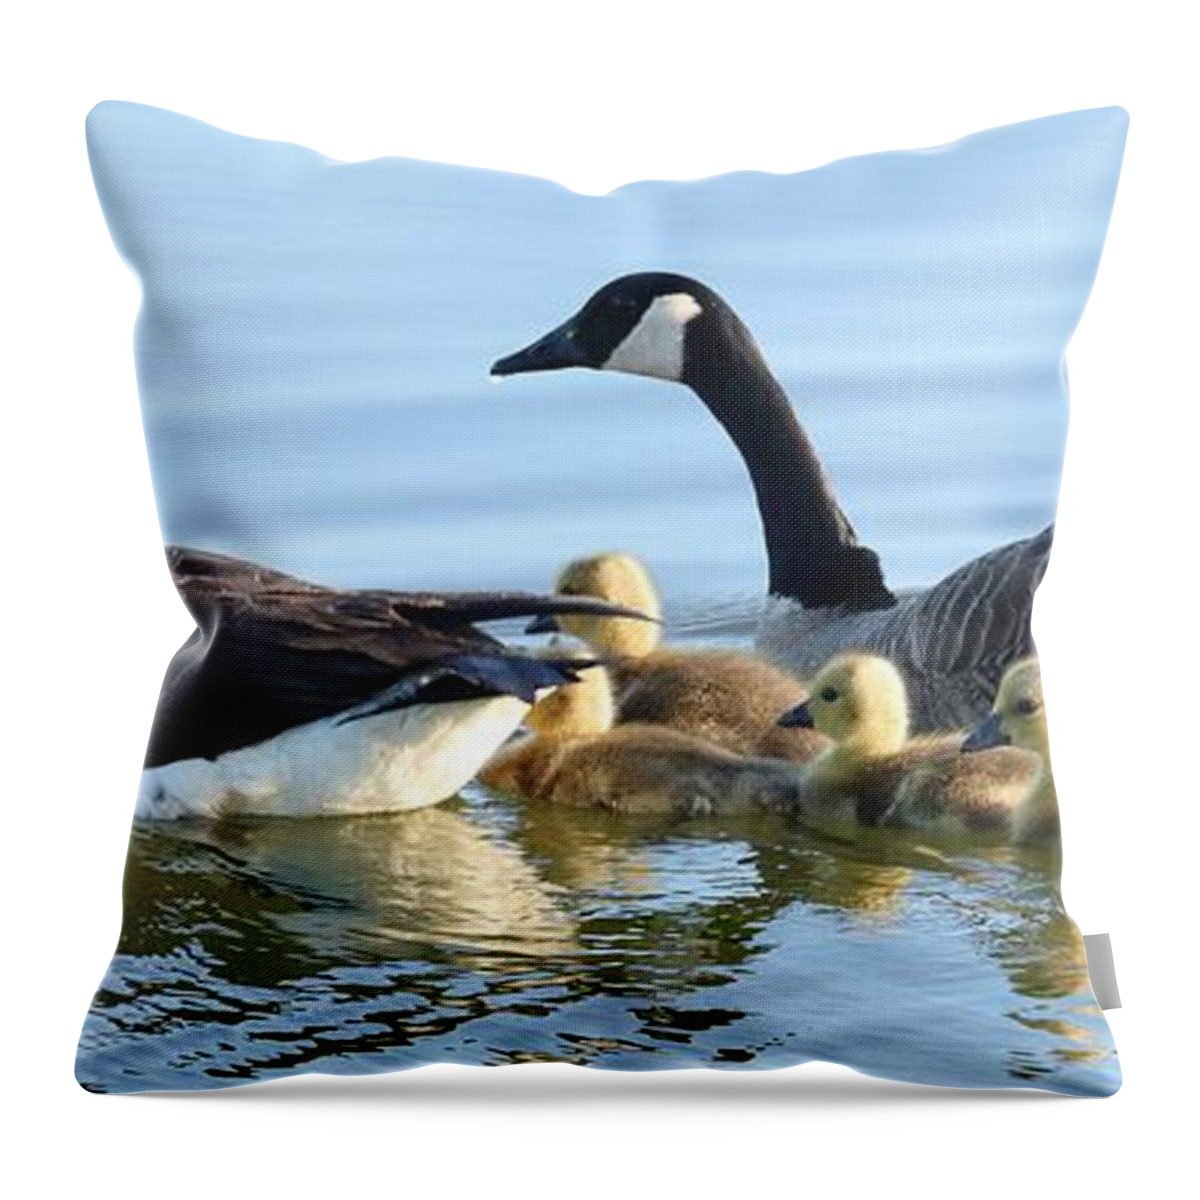 Canada Geese Throw Pillow featuring the photograph Keeping Them Safe by I'ina Van Lawick